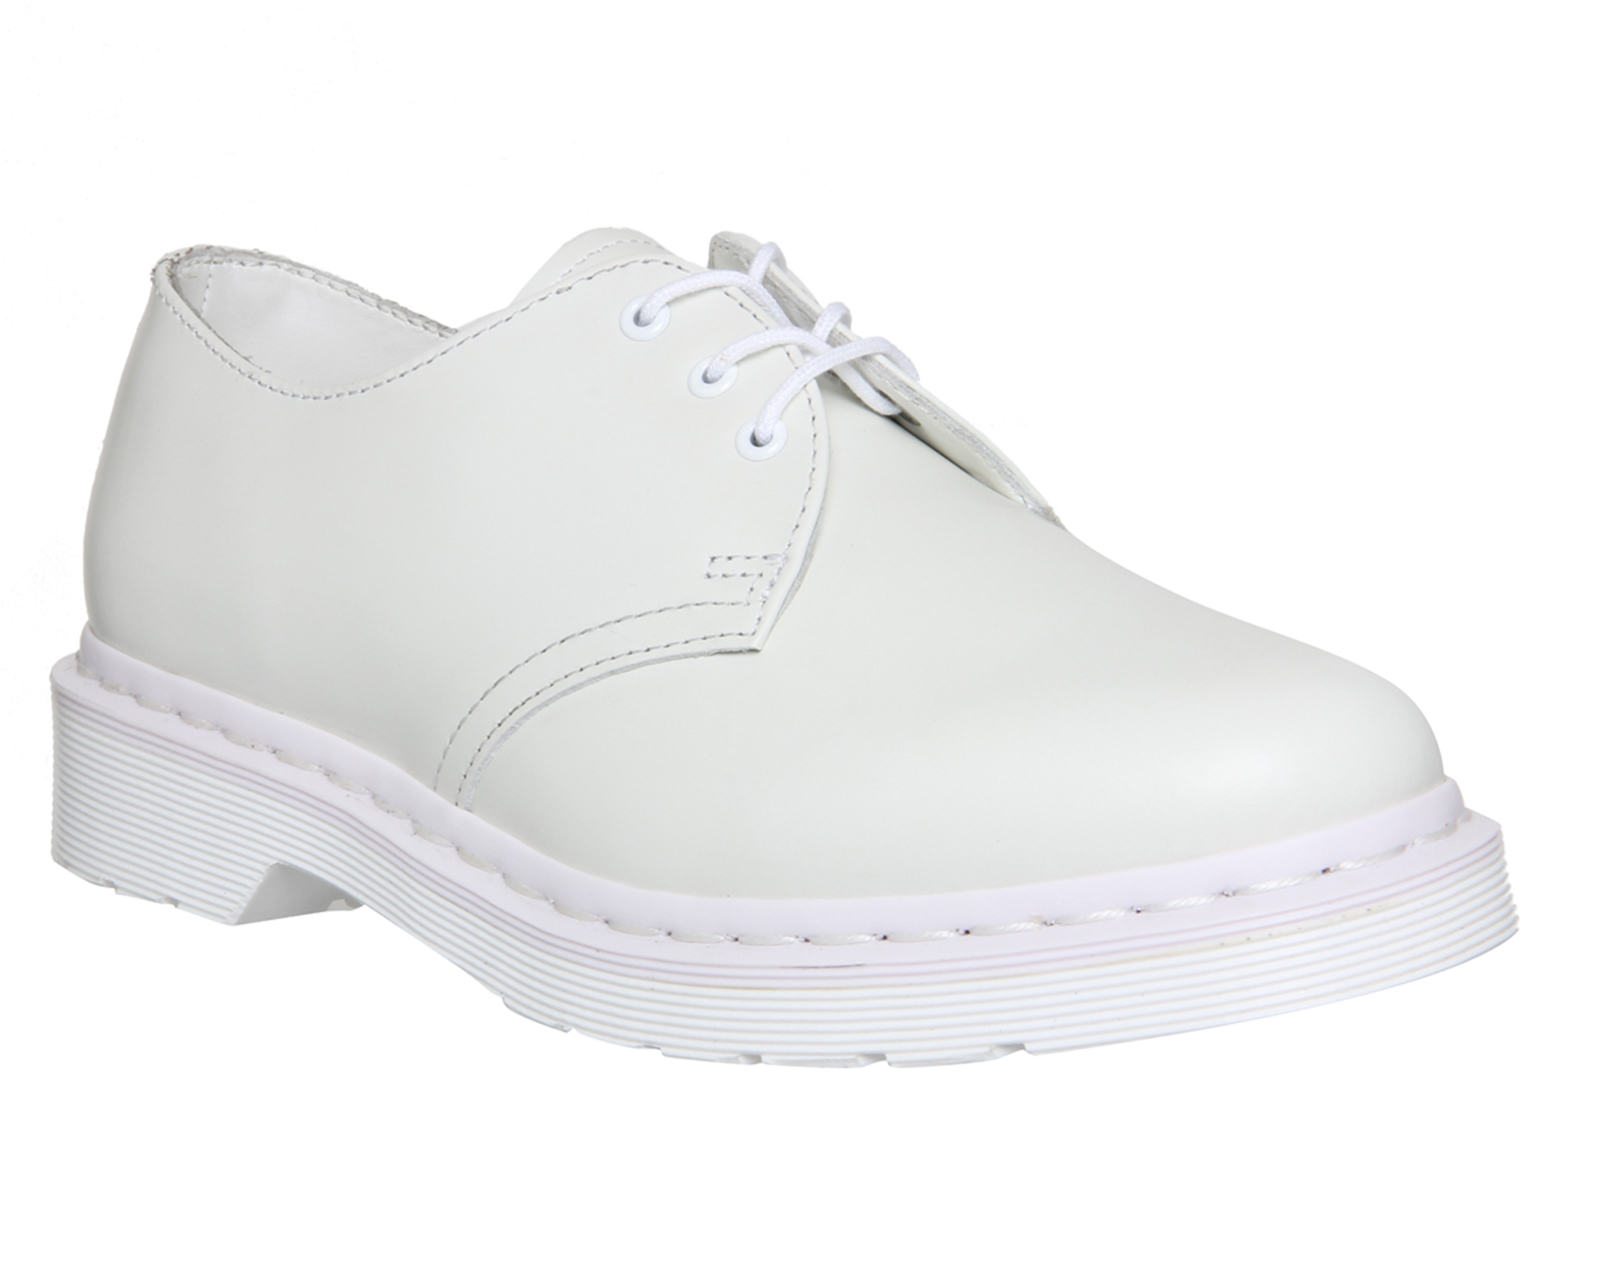 white low dr martens